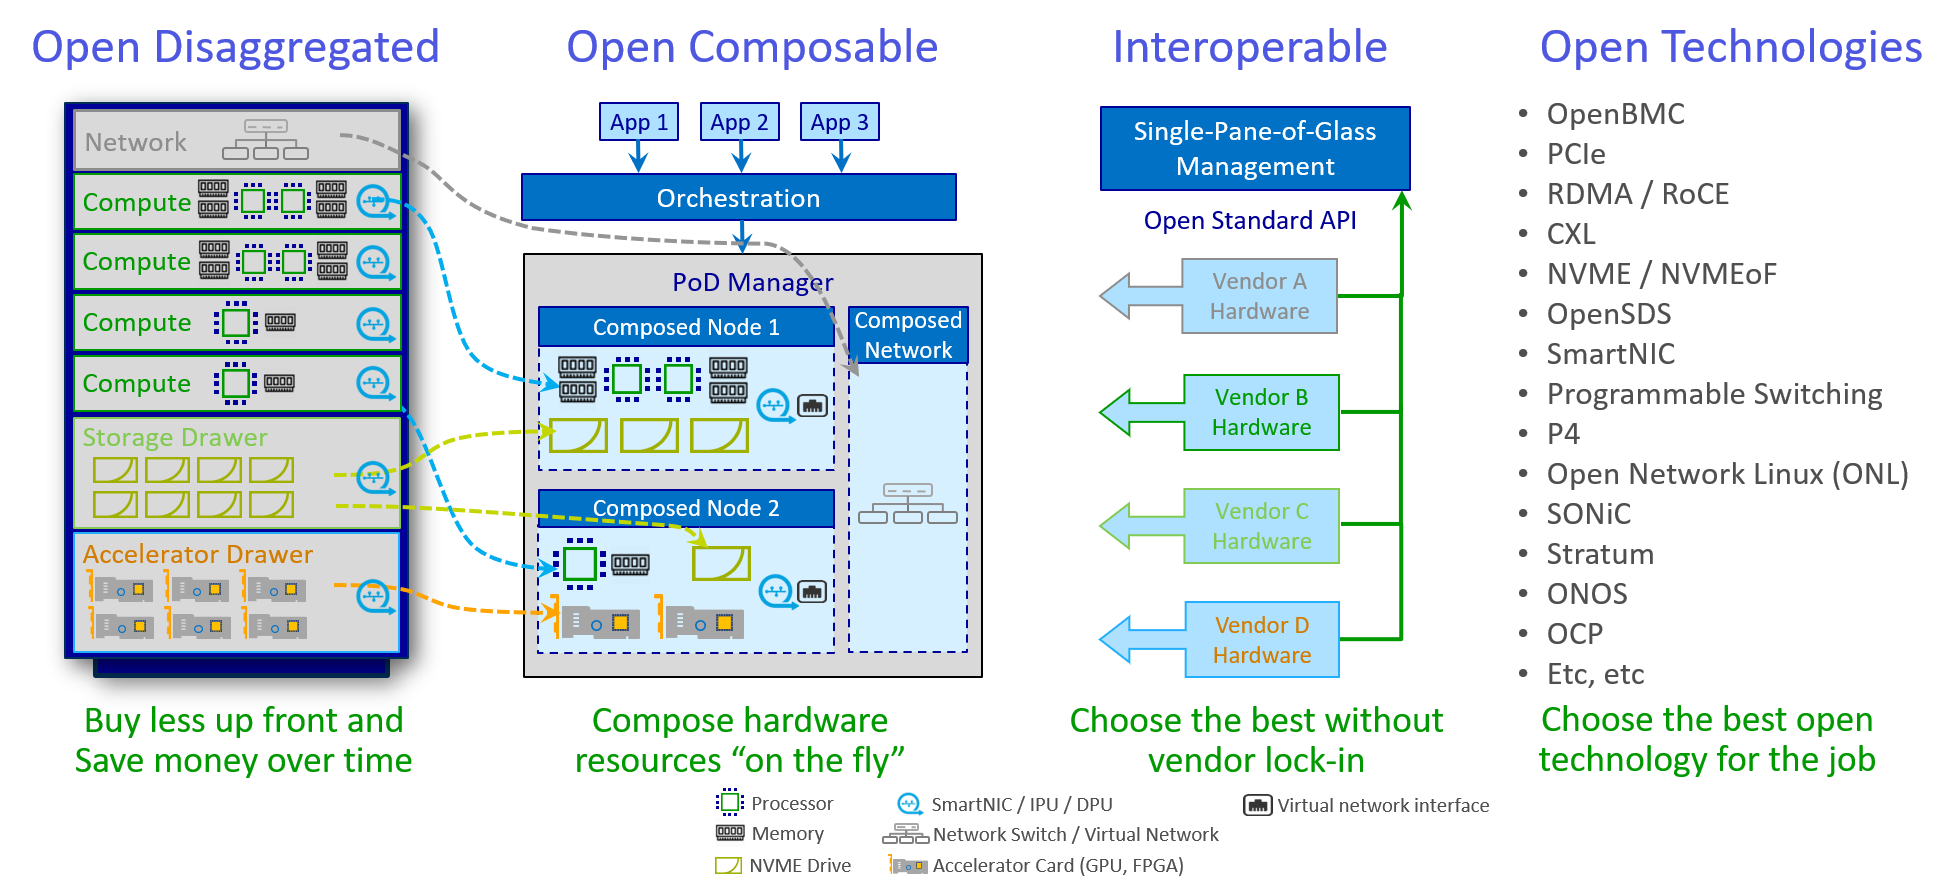 A vision of an Open Disaggregated Composable and Interoperable Infrastructure